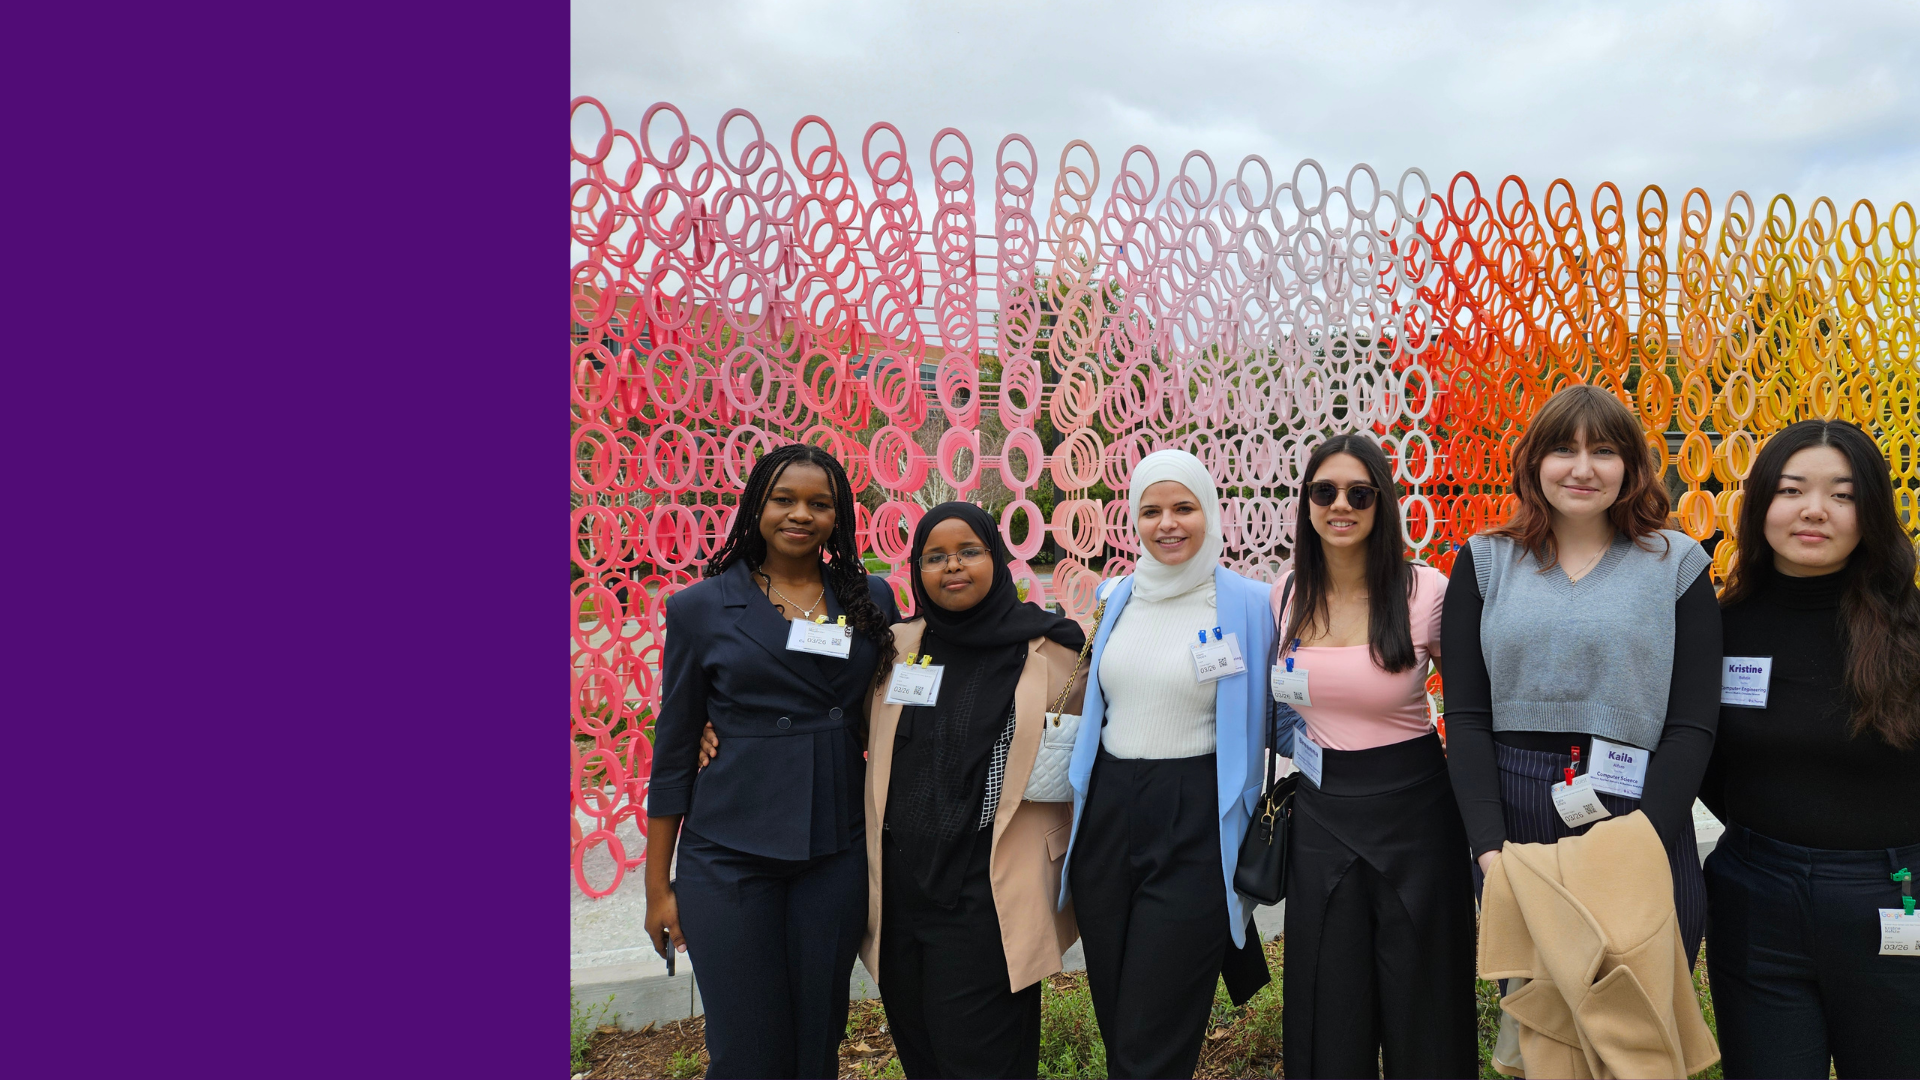 Students stand in front of colorful wall during Career Trek